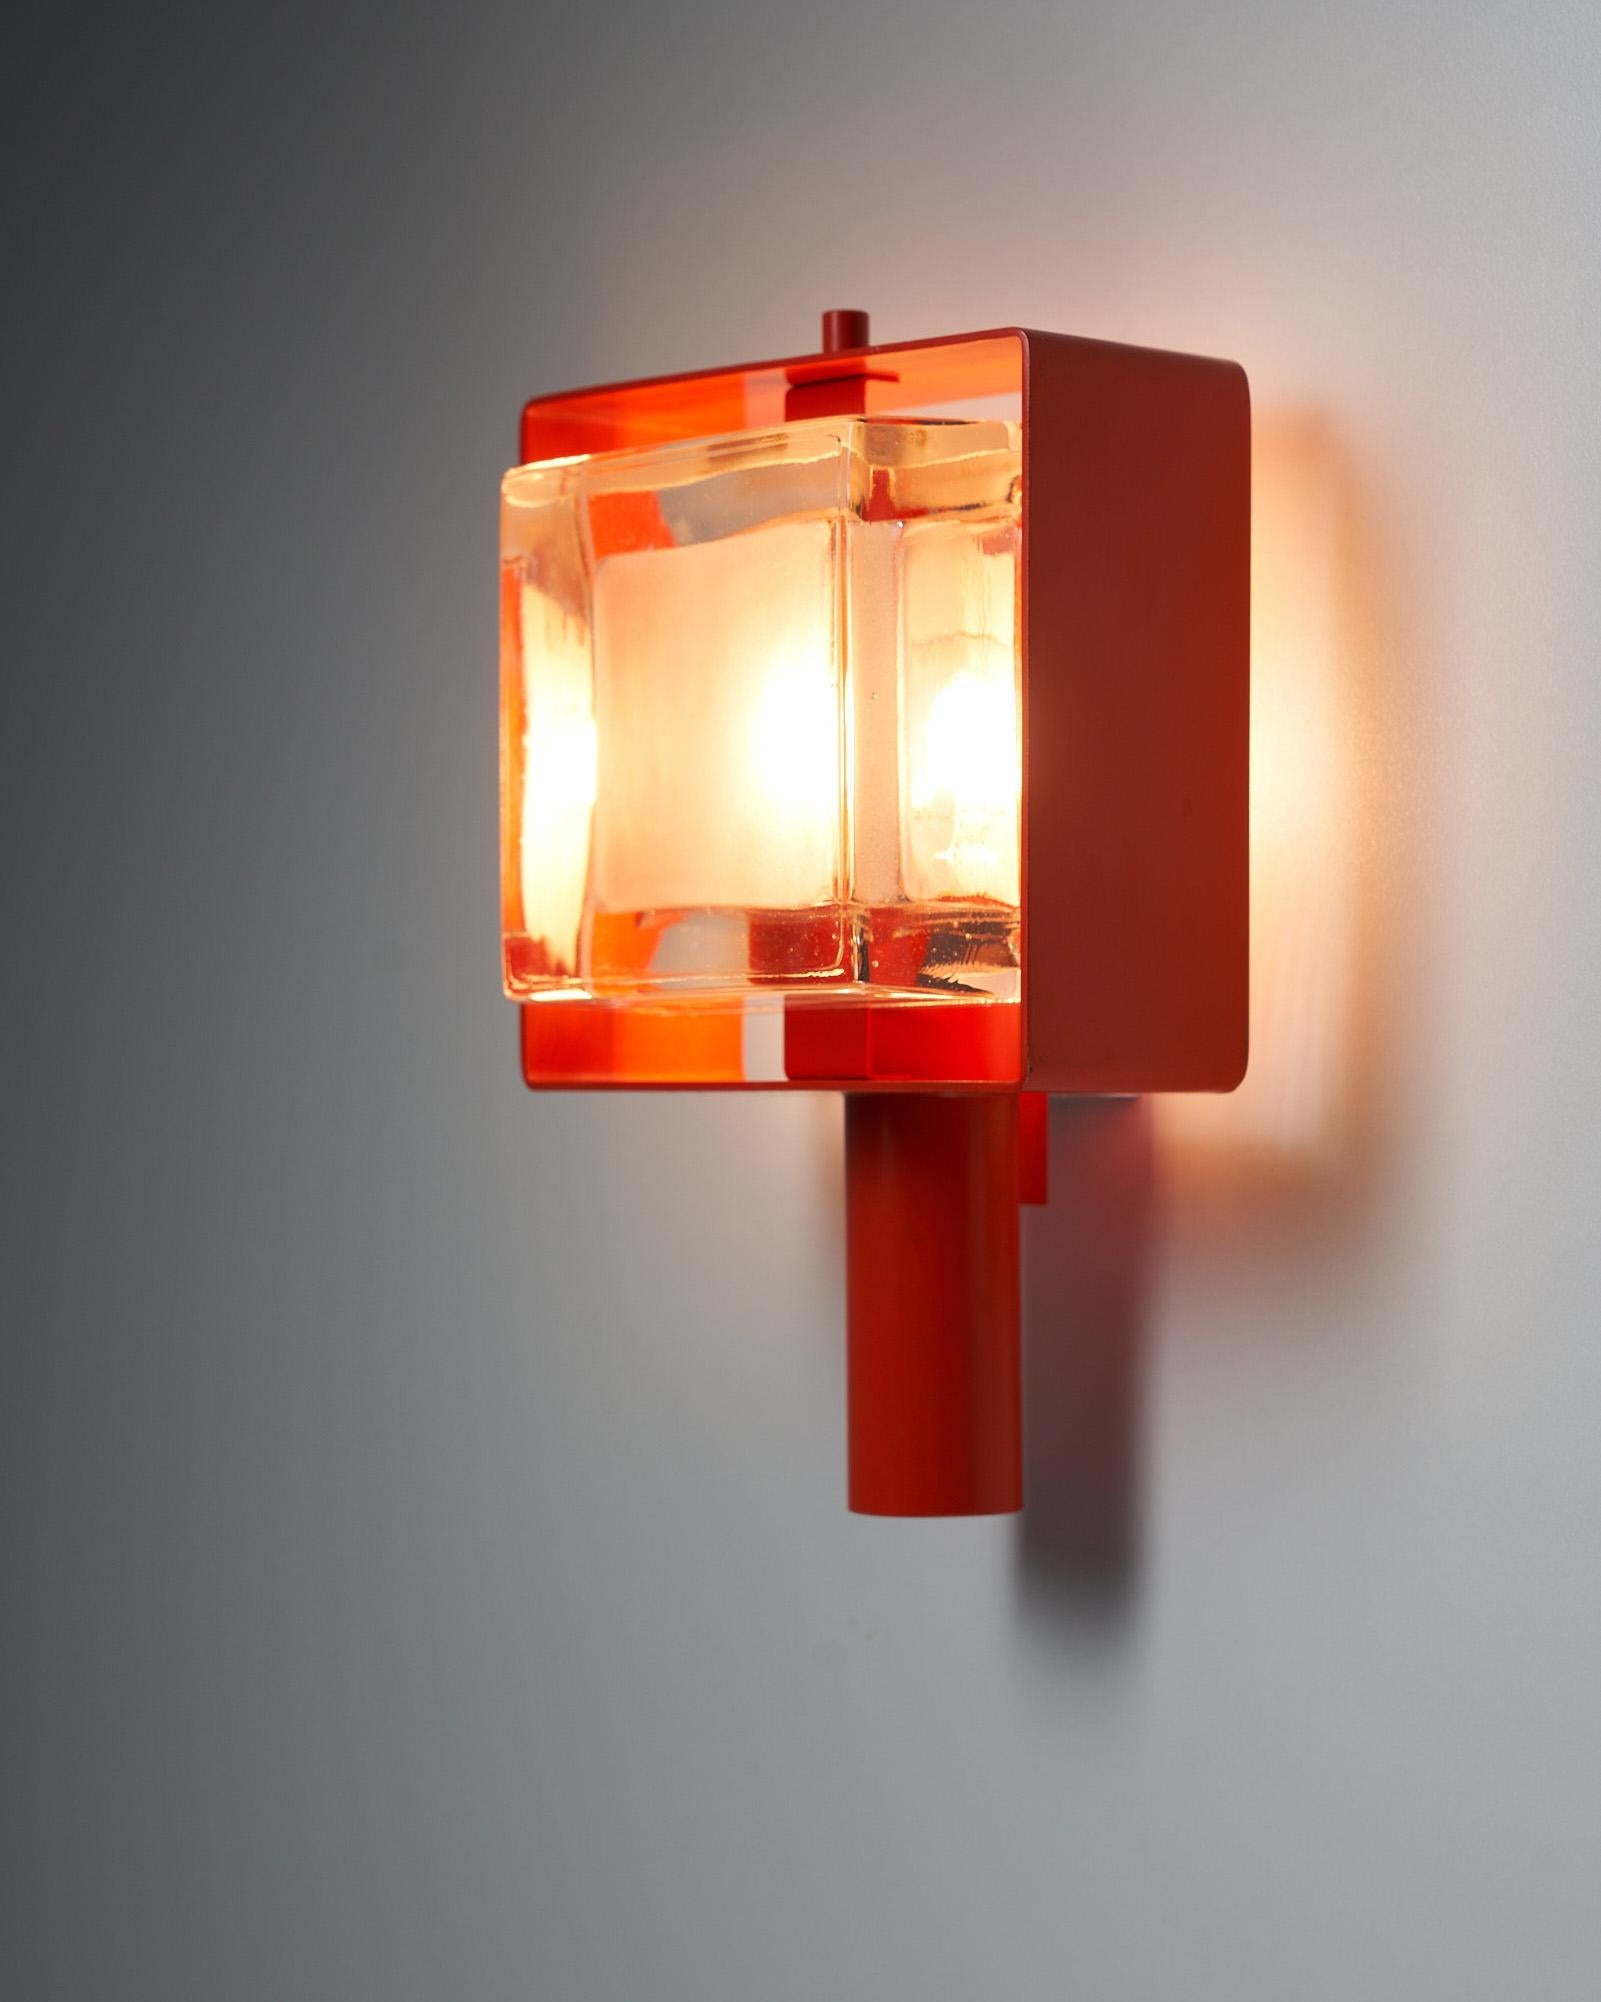 Introducing a wall lamp by the iconic manufacturer BAG Turgi, revered among design enthusiasts for its timeless creations. Discovering a new, unique piece from this esteemed brand is always a delight, as their items are notoriously difficult to come